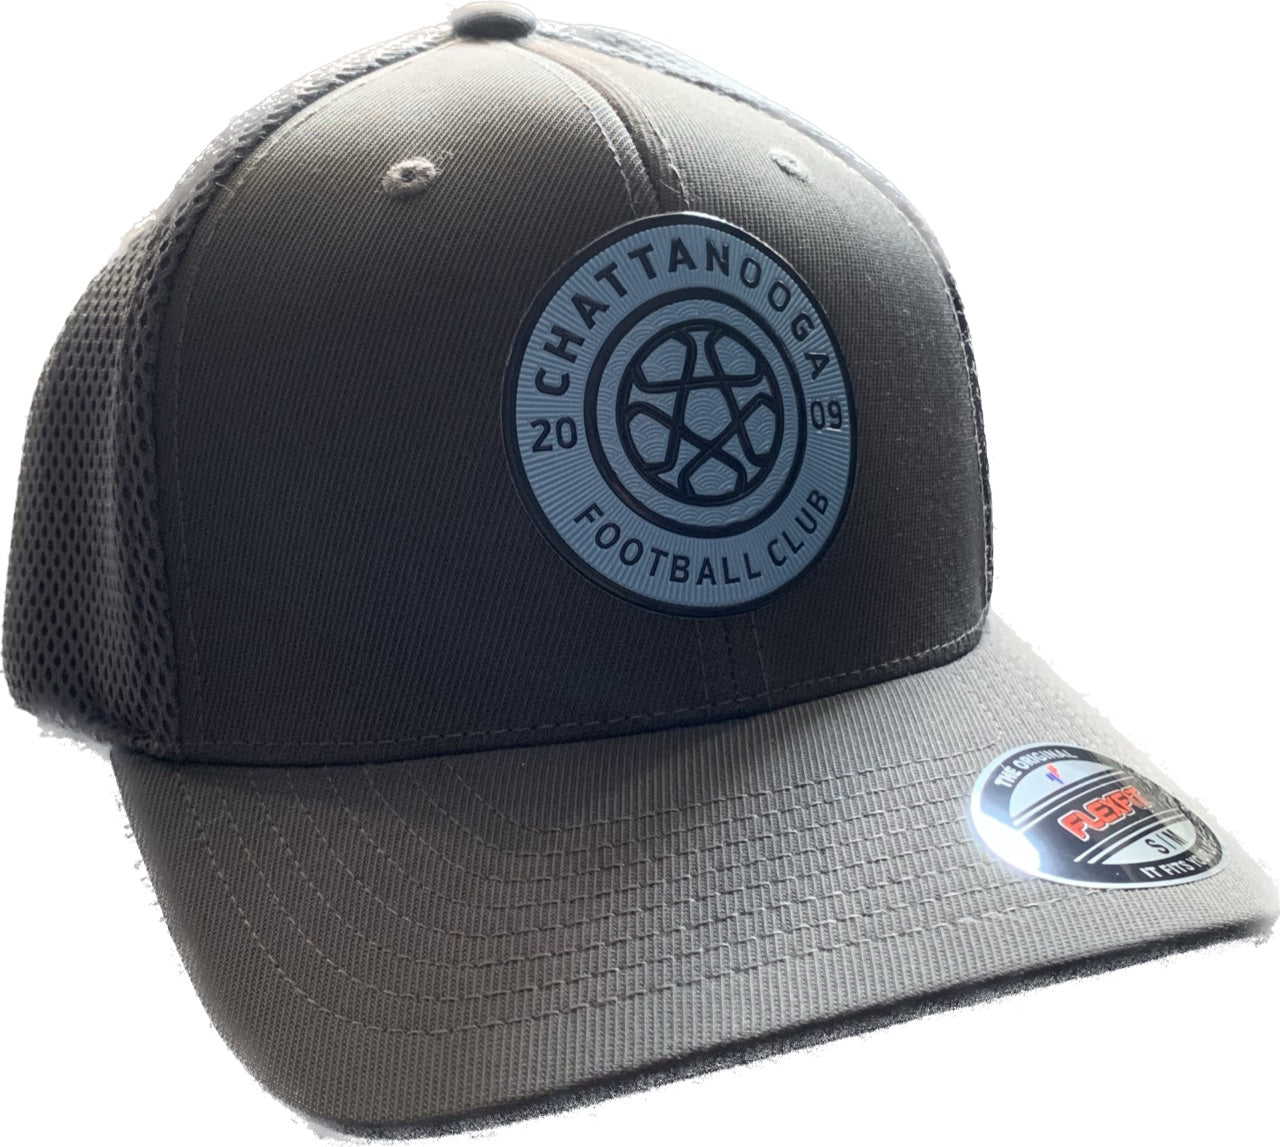 FC (Gray/Gray) Chattanooga Cap – Shop Flex at Fit The